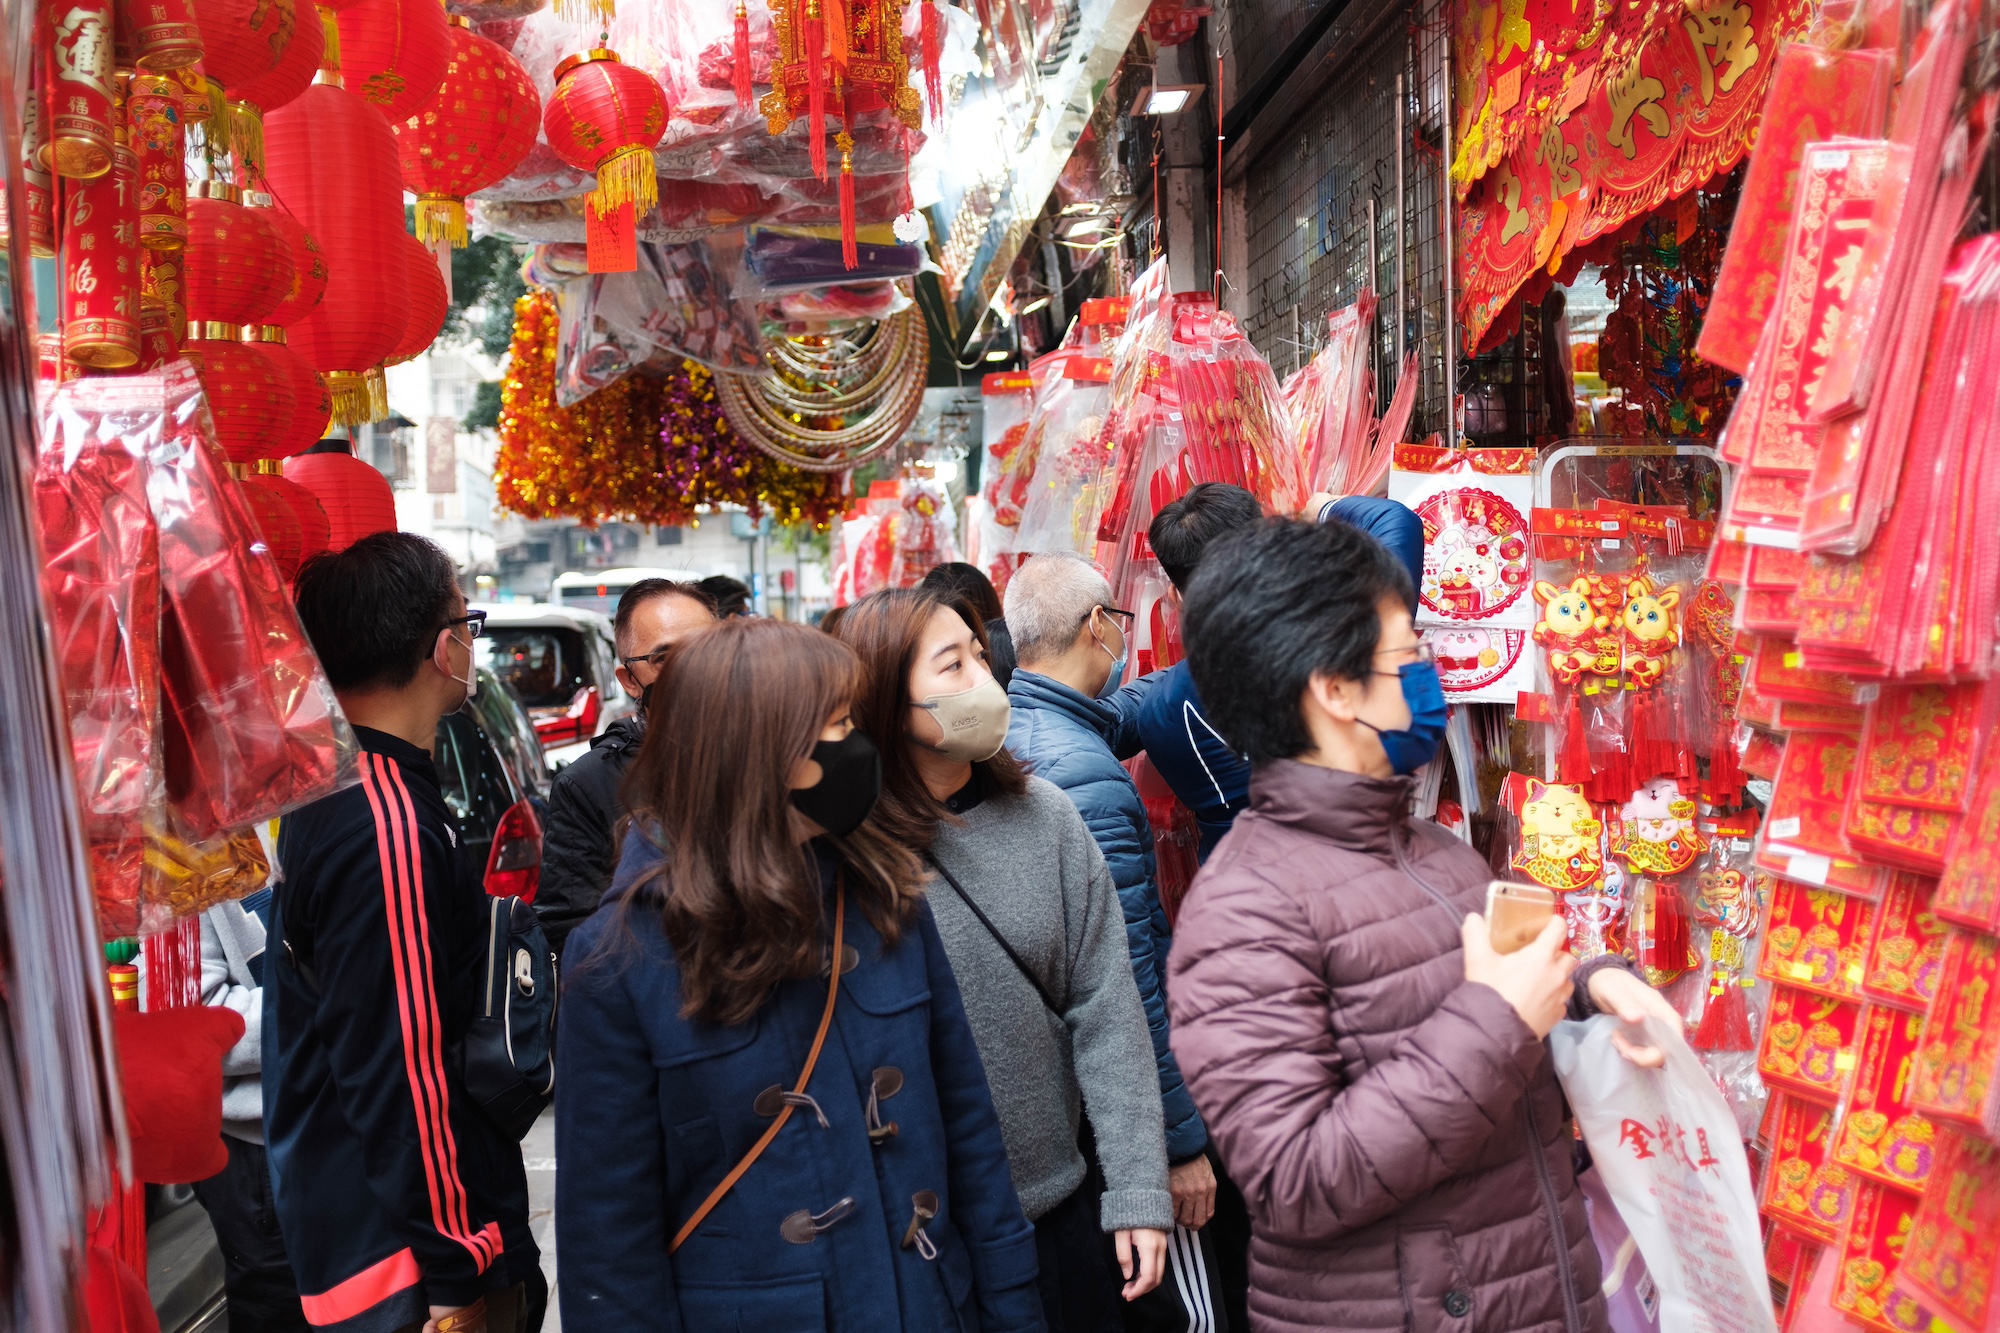 Local tourism experts are thinking big for Lunar New Year